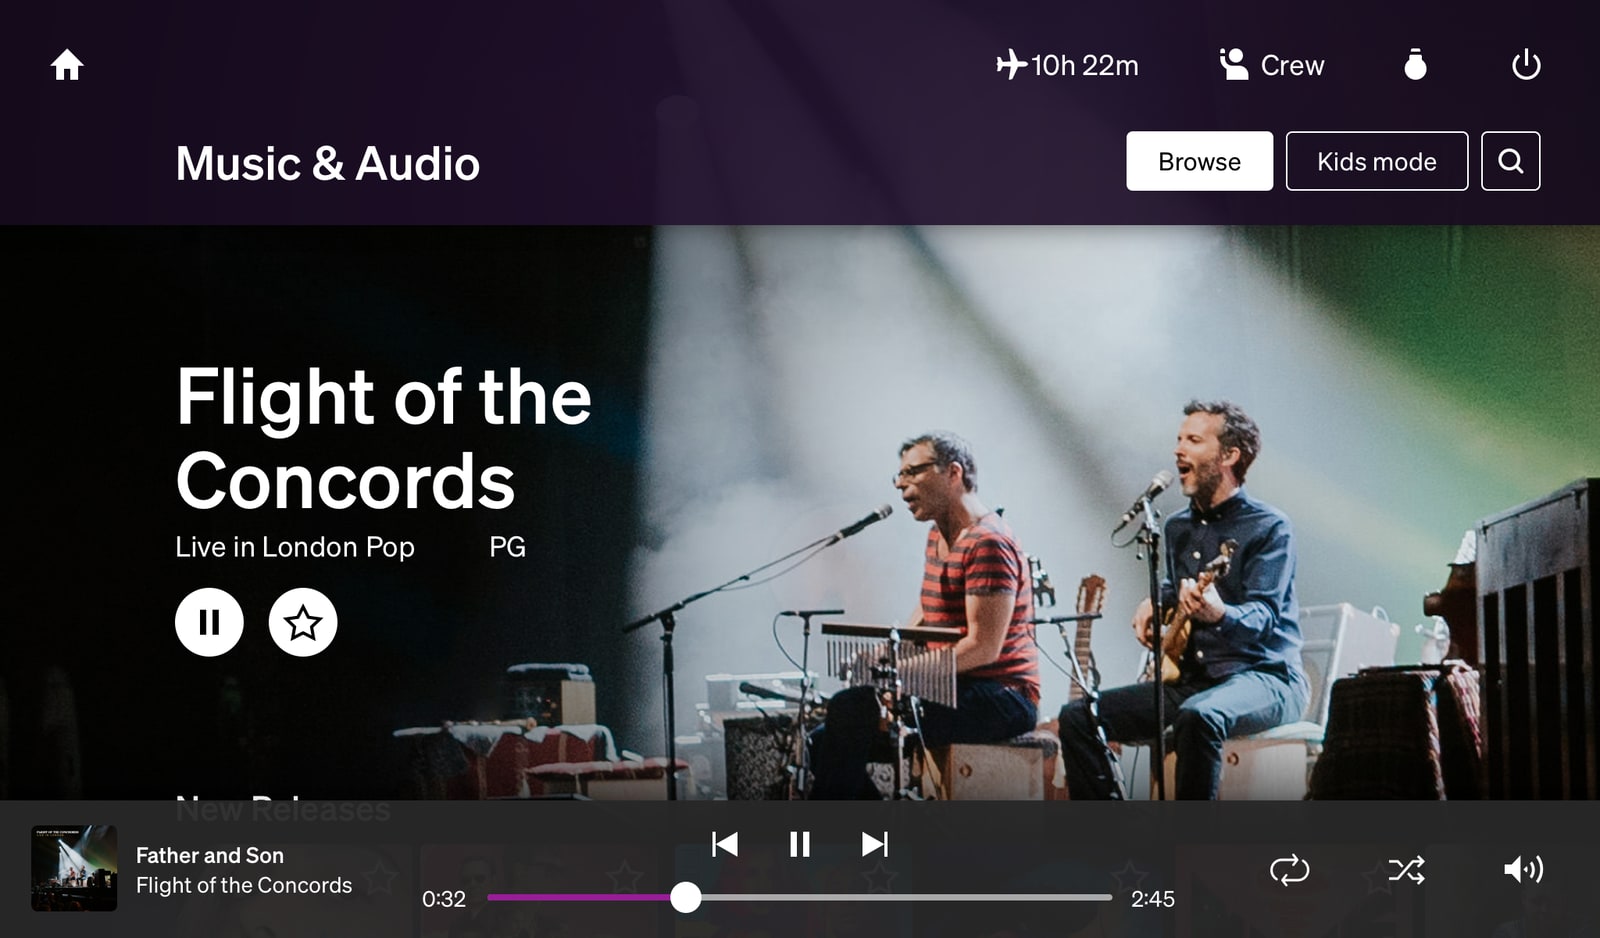 Listen app showing hero title and the media player controls visibly playing a song.